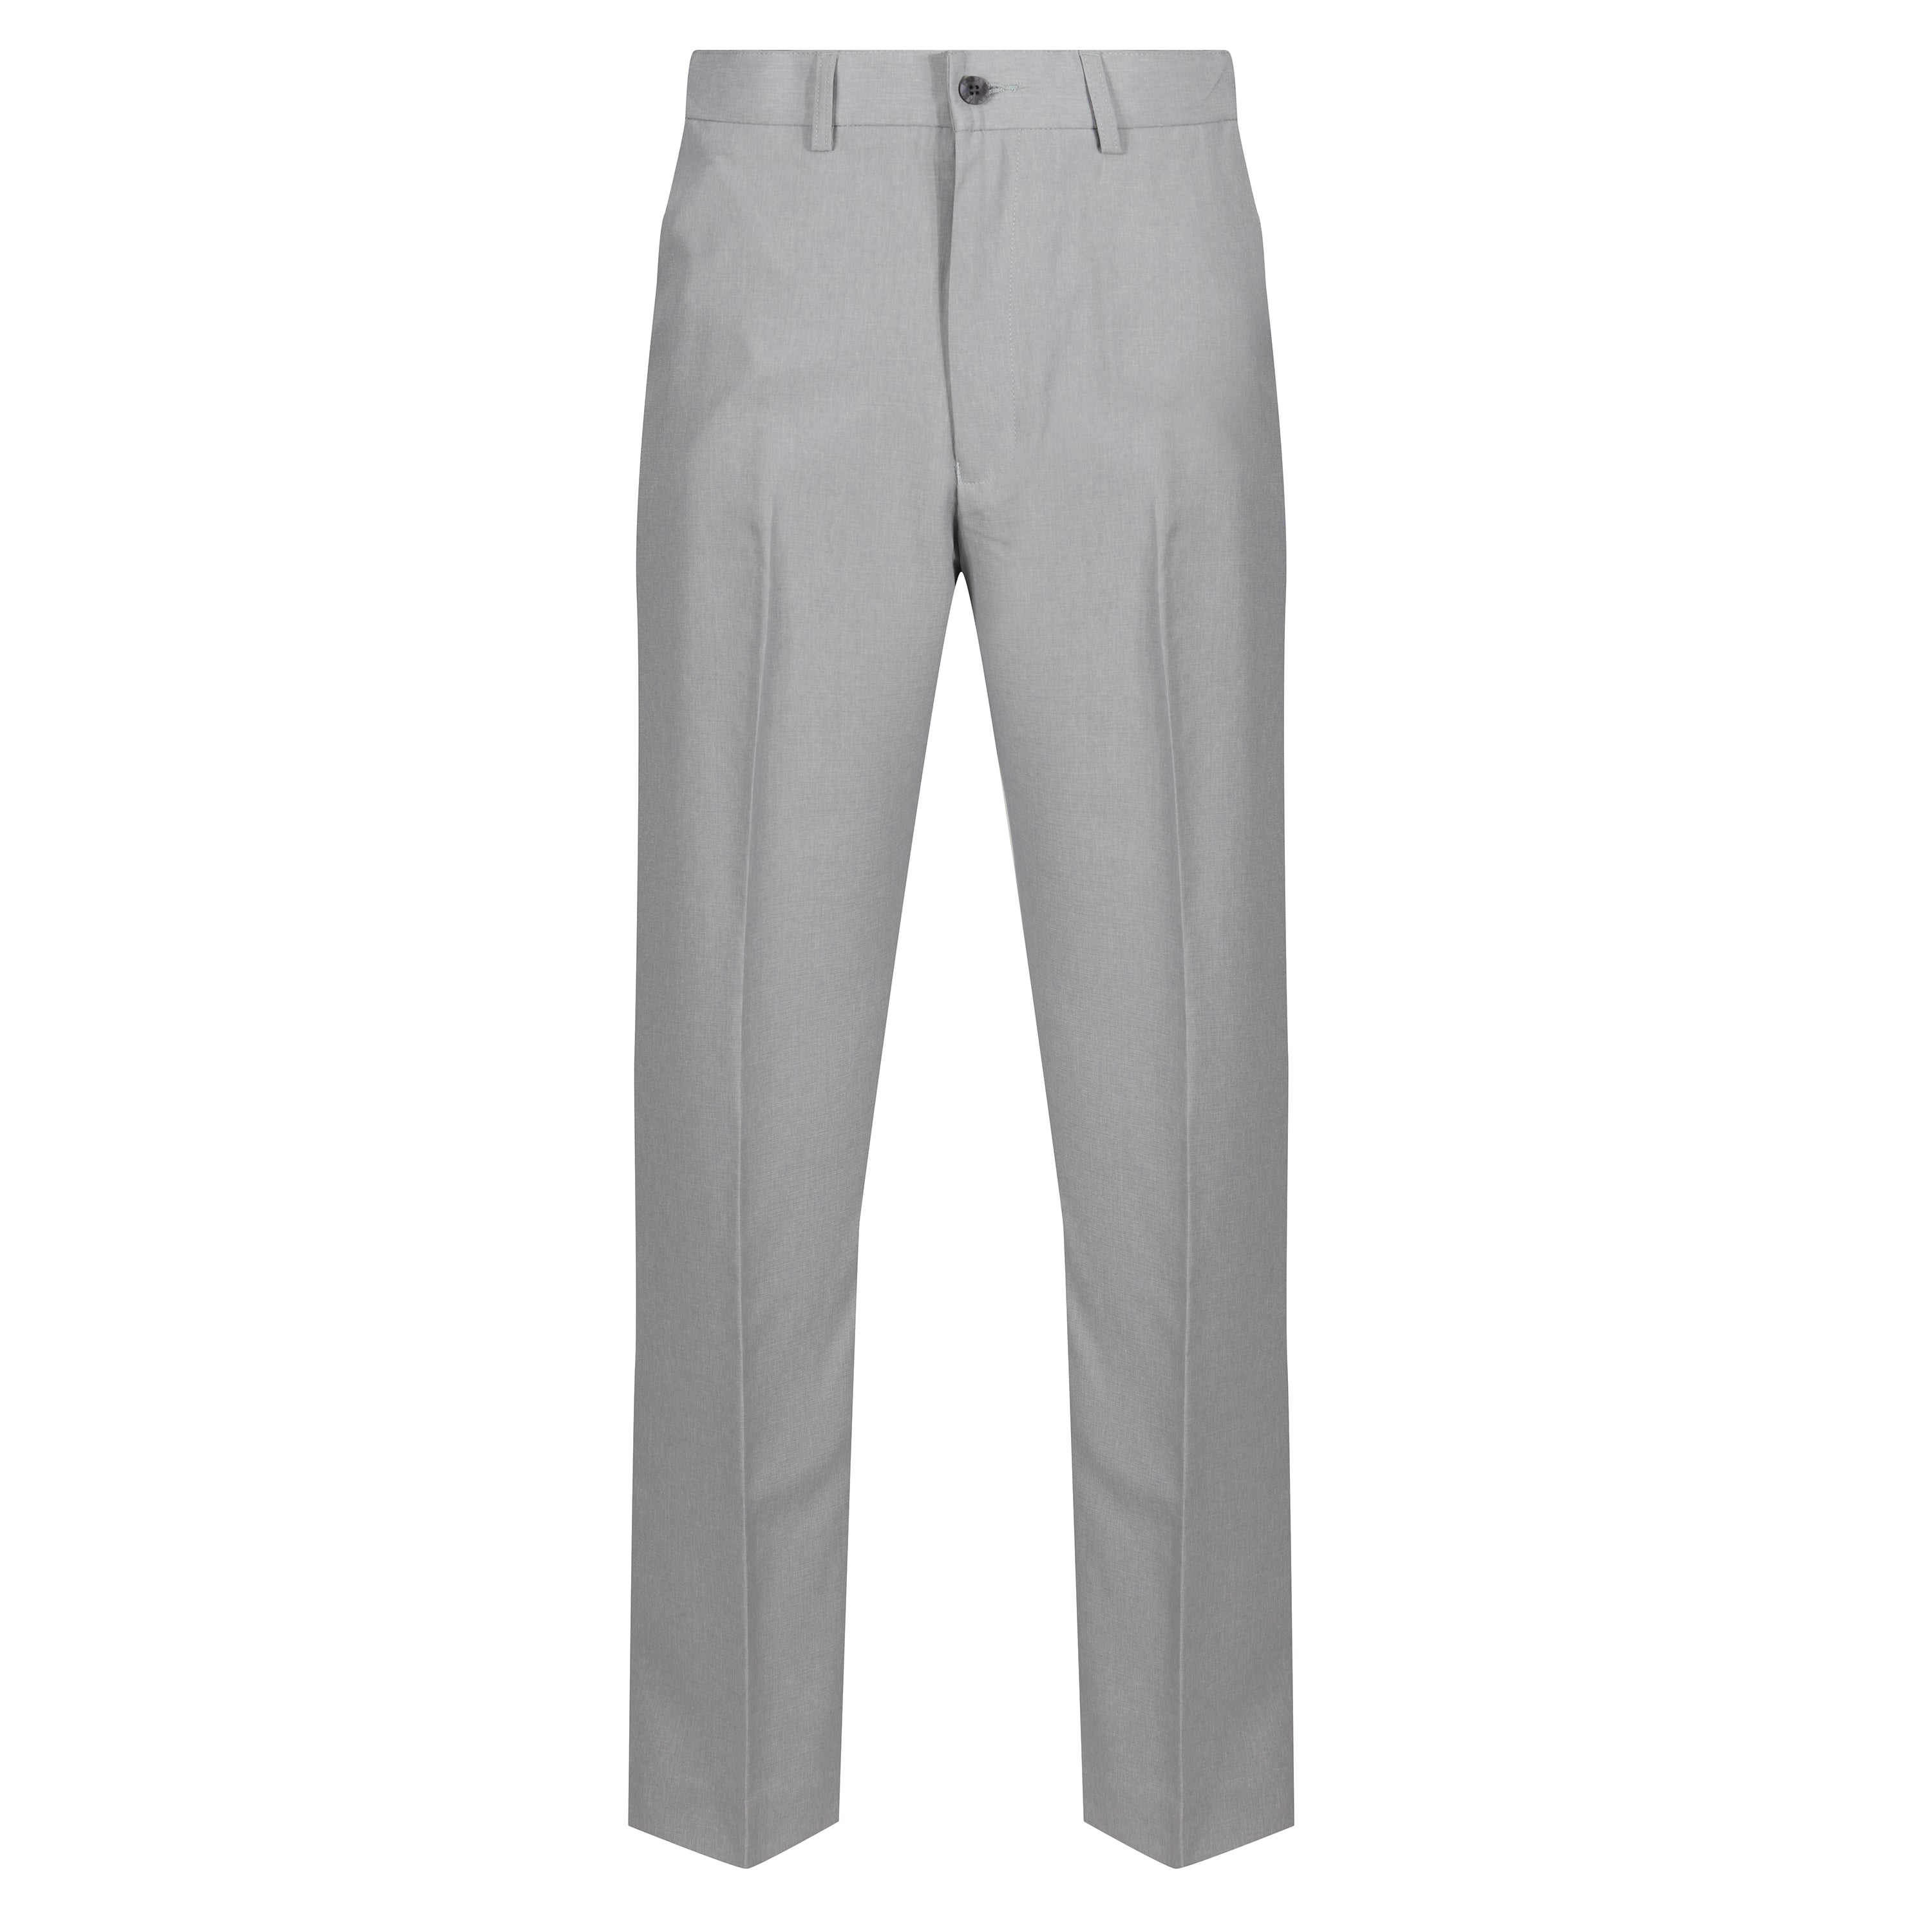 Plain Grey Color Slim Fit Trouser For Casual Wear With Anti Wrinkle Fabric  at Best Price in Ahmedabad | Arihant Selection